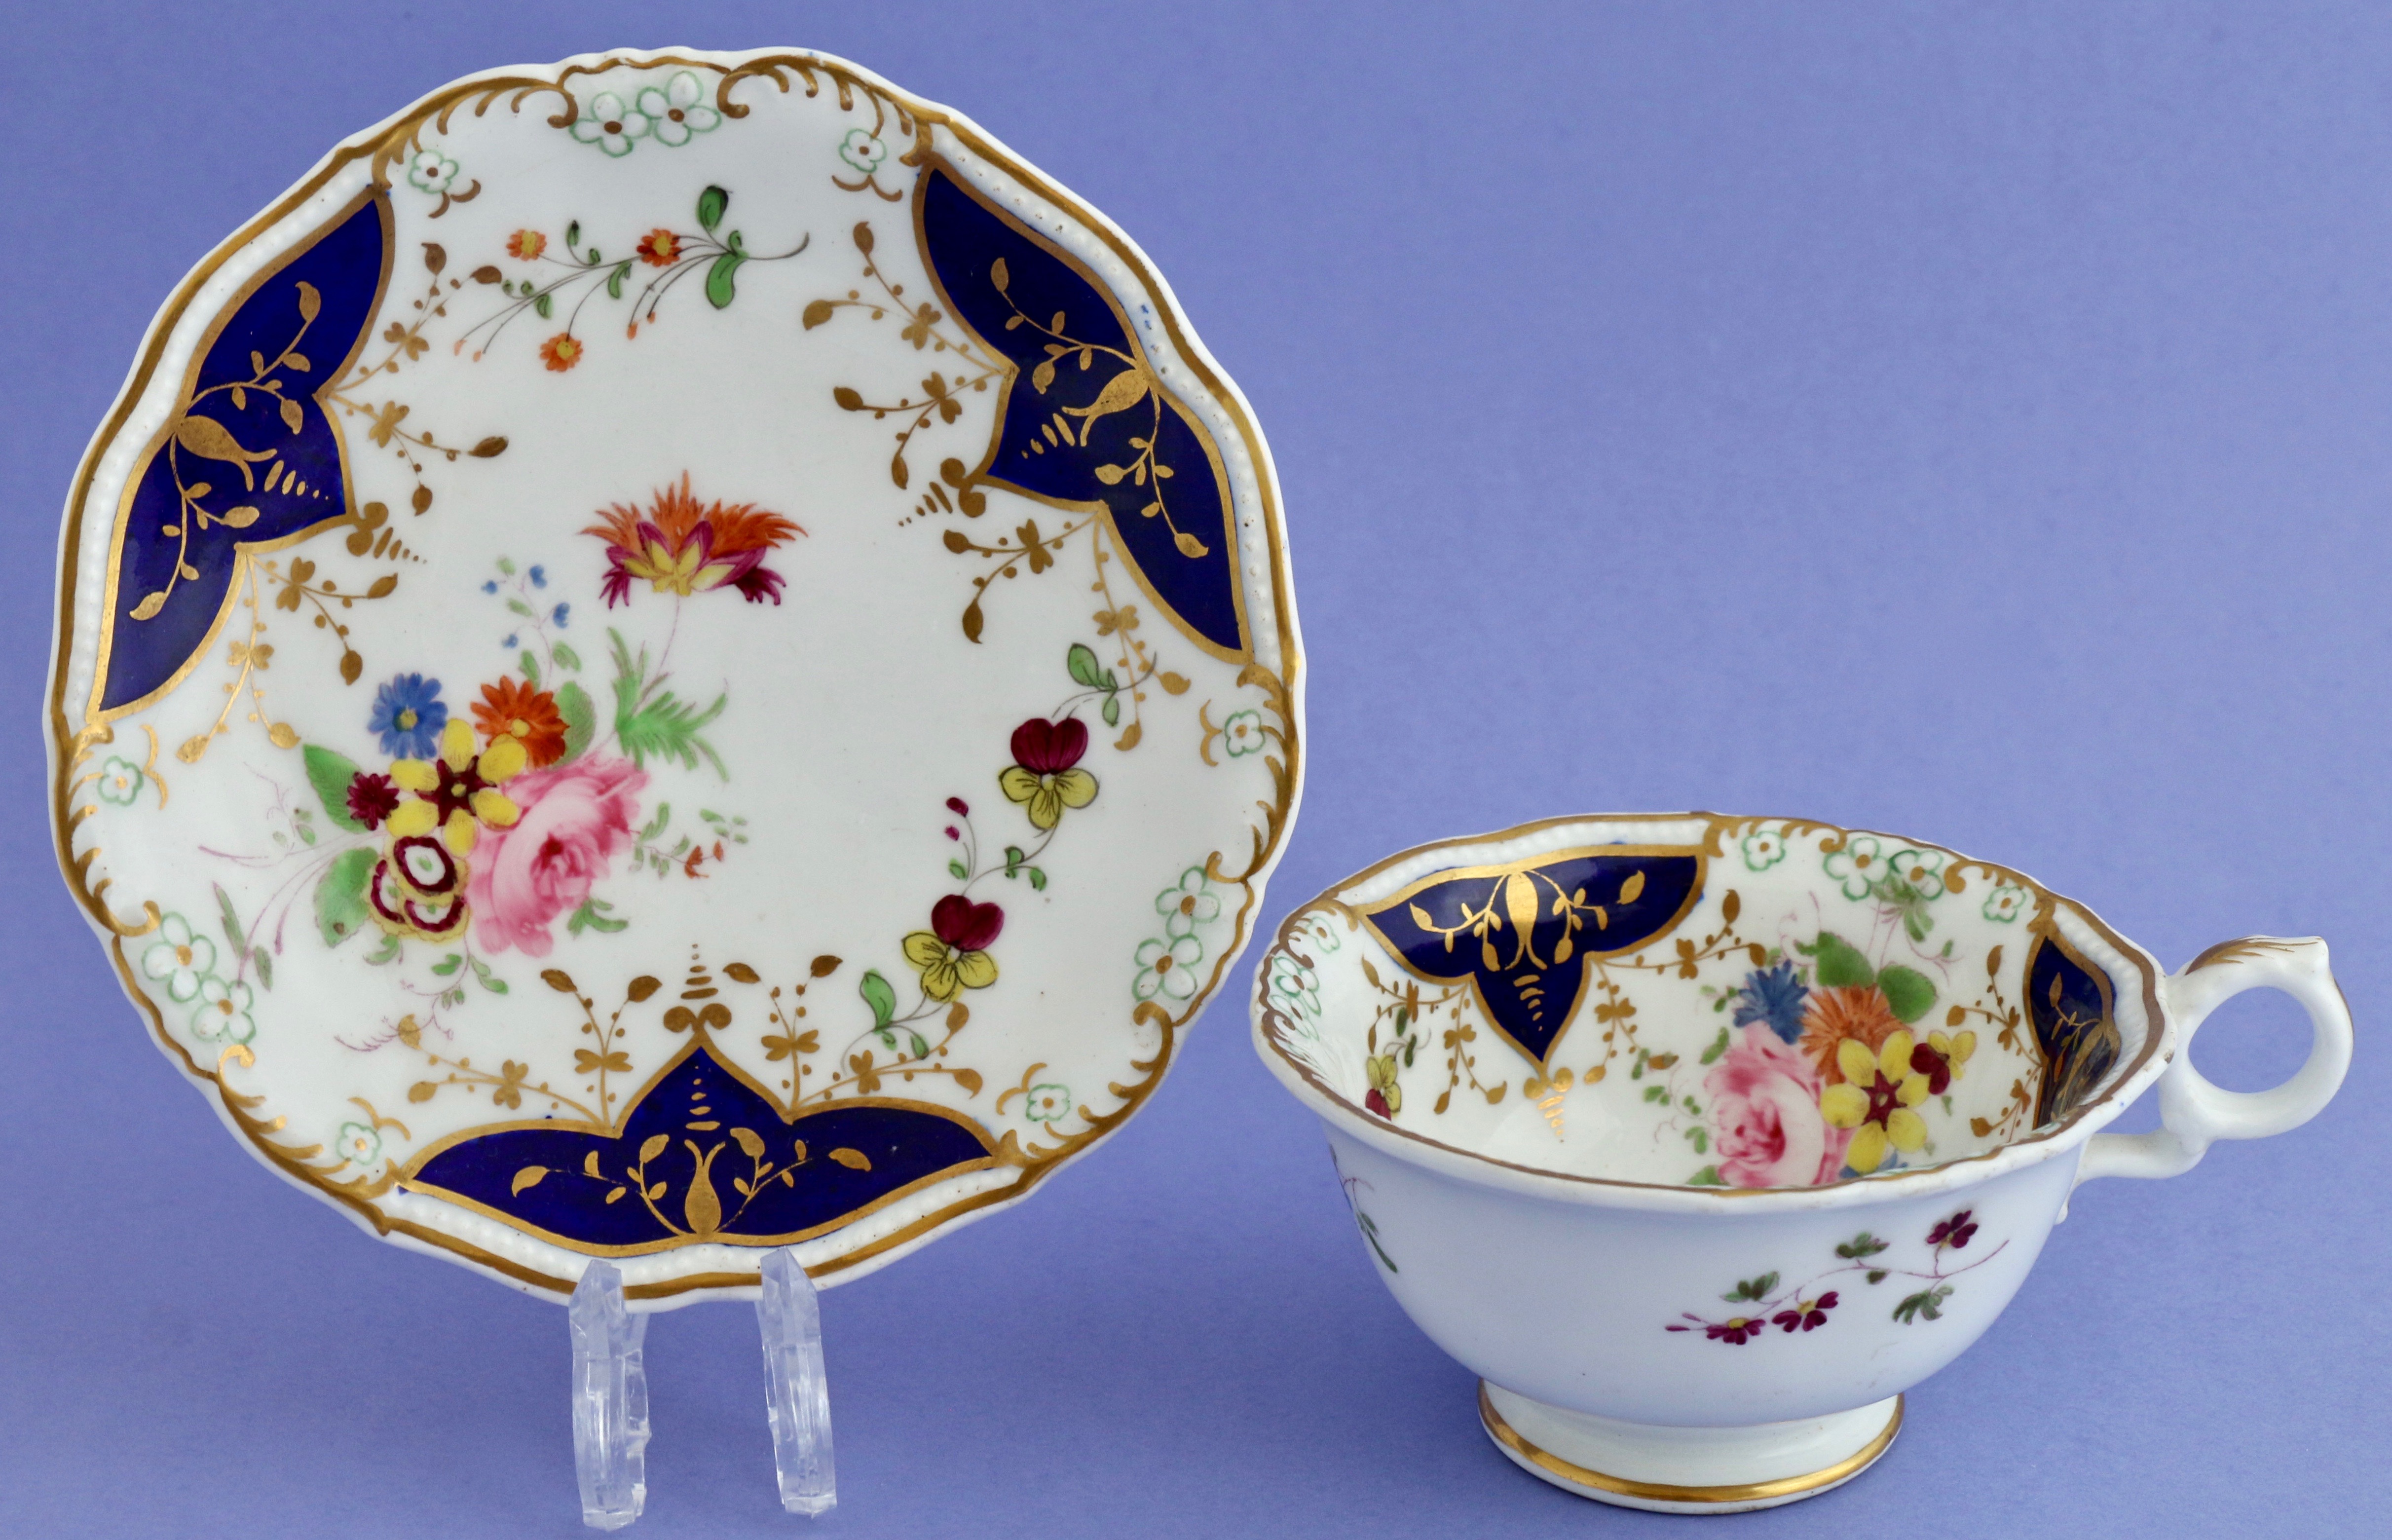 Grainger 'Gloster' cup & saucer, summer bouquets, 1835-9